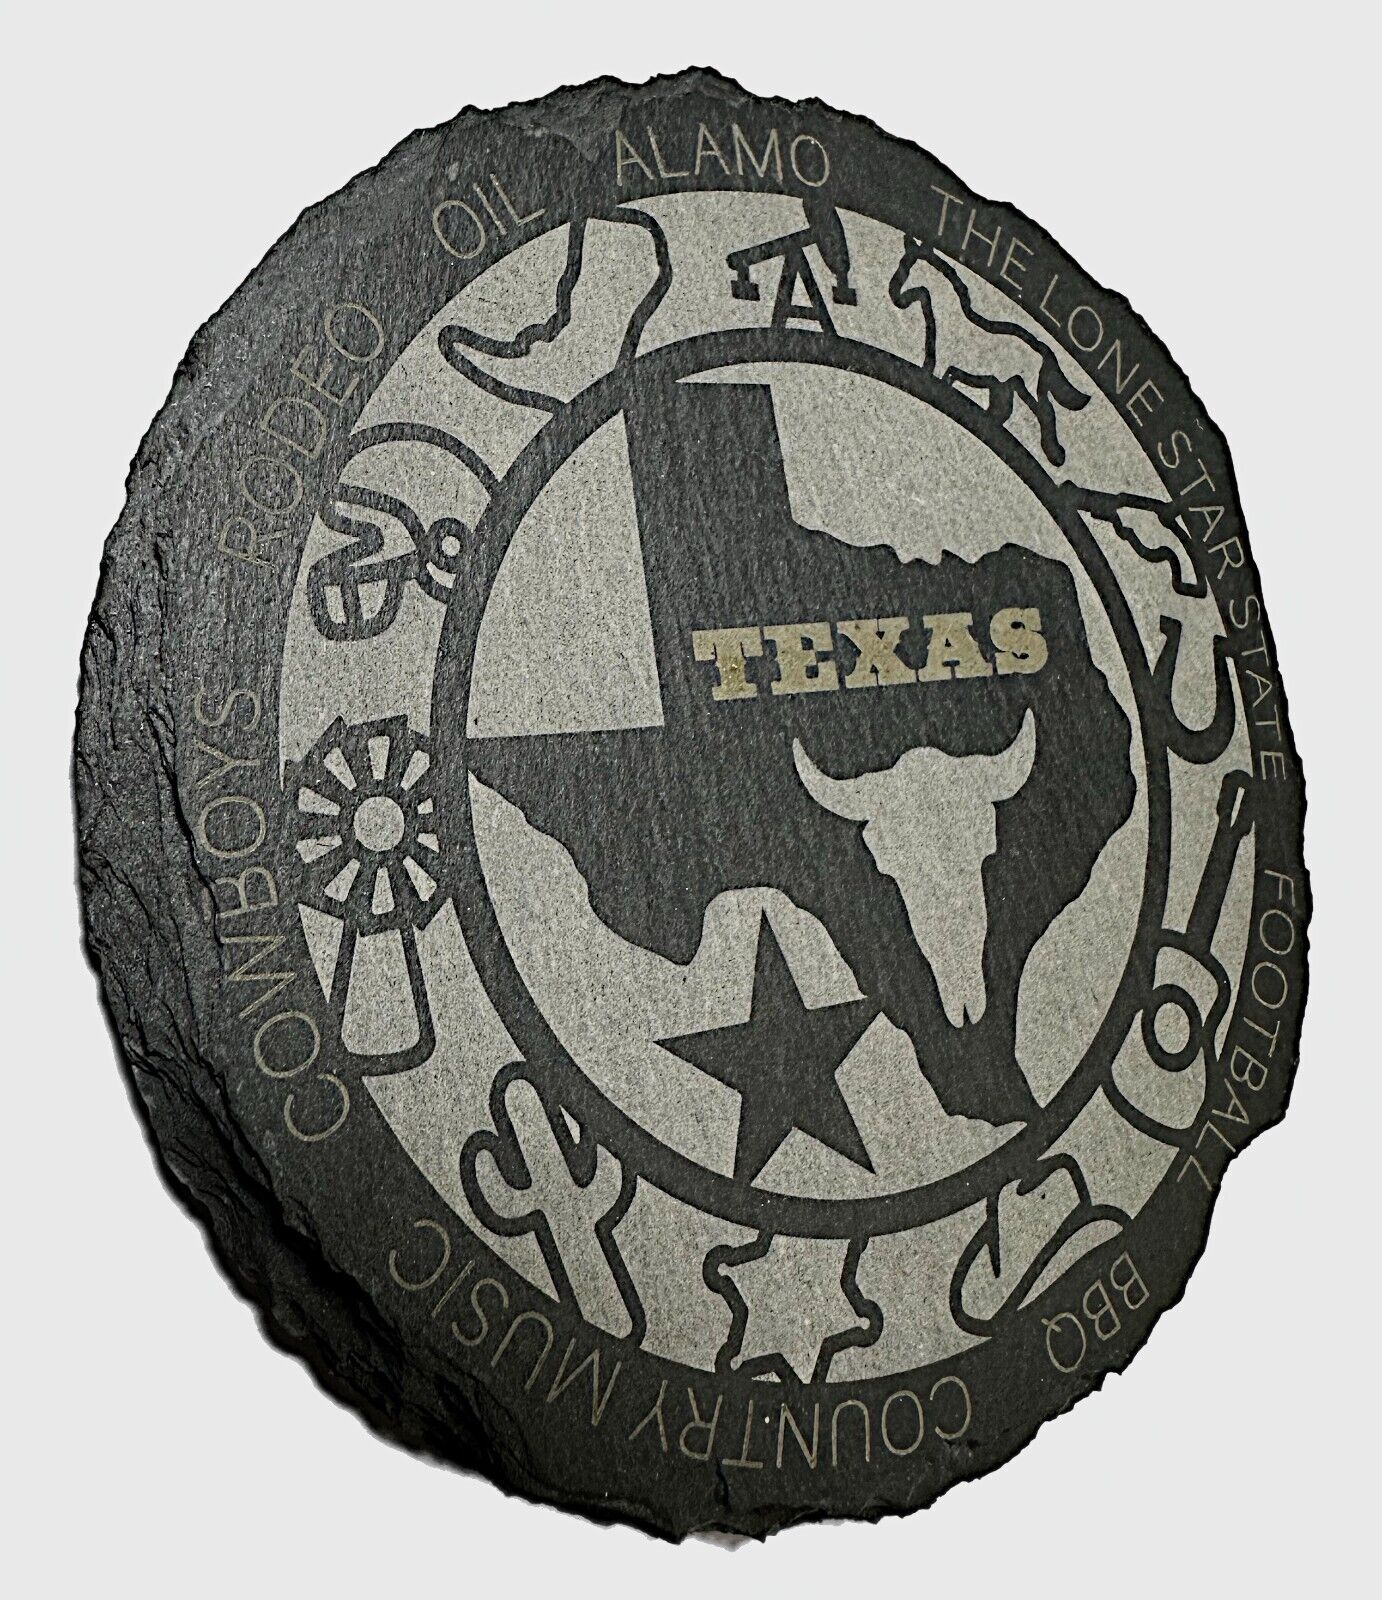 Round Slate Stone Drink Coasters Featuring All U.S. States & USA Design Engraved